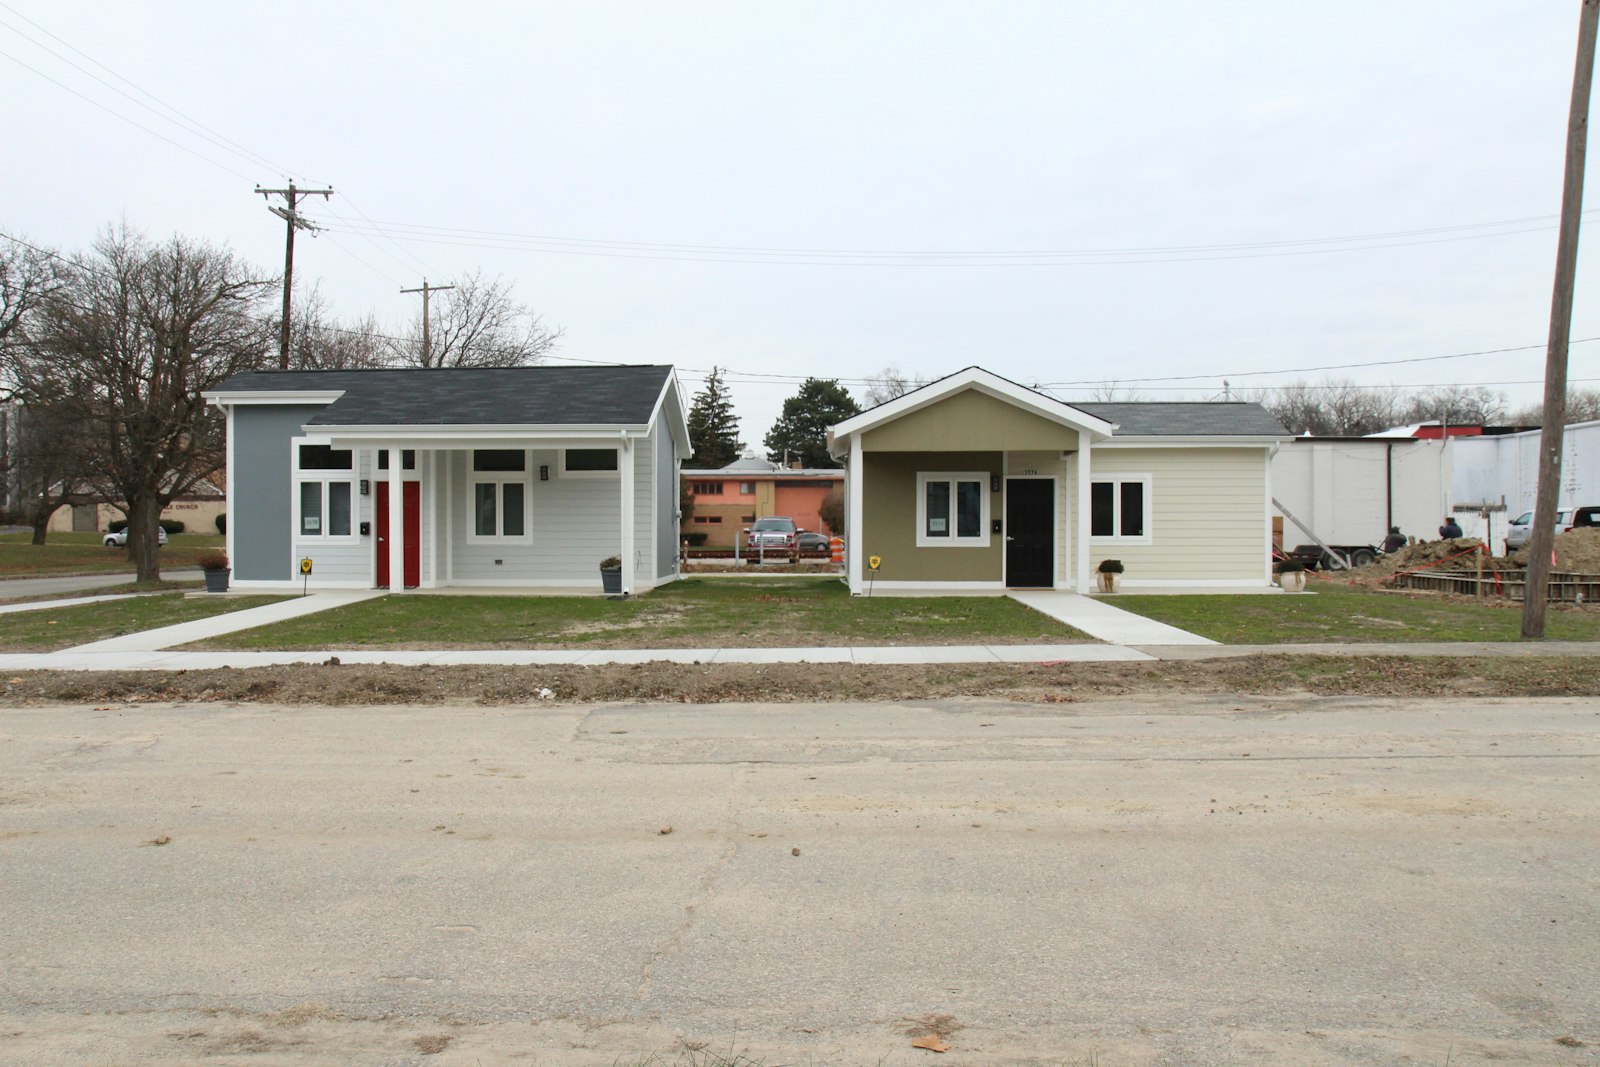 Prior to construction beginning on the tiny homes, Bluff Street was an almost entirely empty city block located adjacent to Monroe Street United Methodist Church.